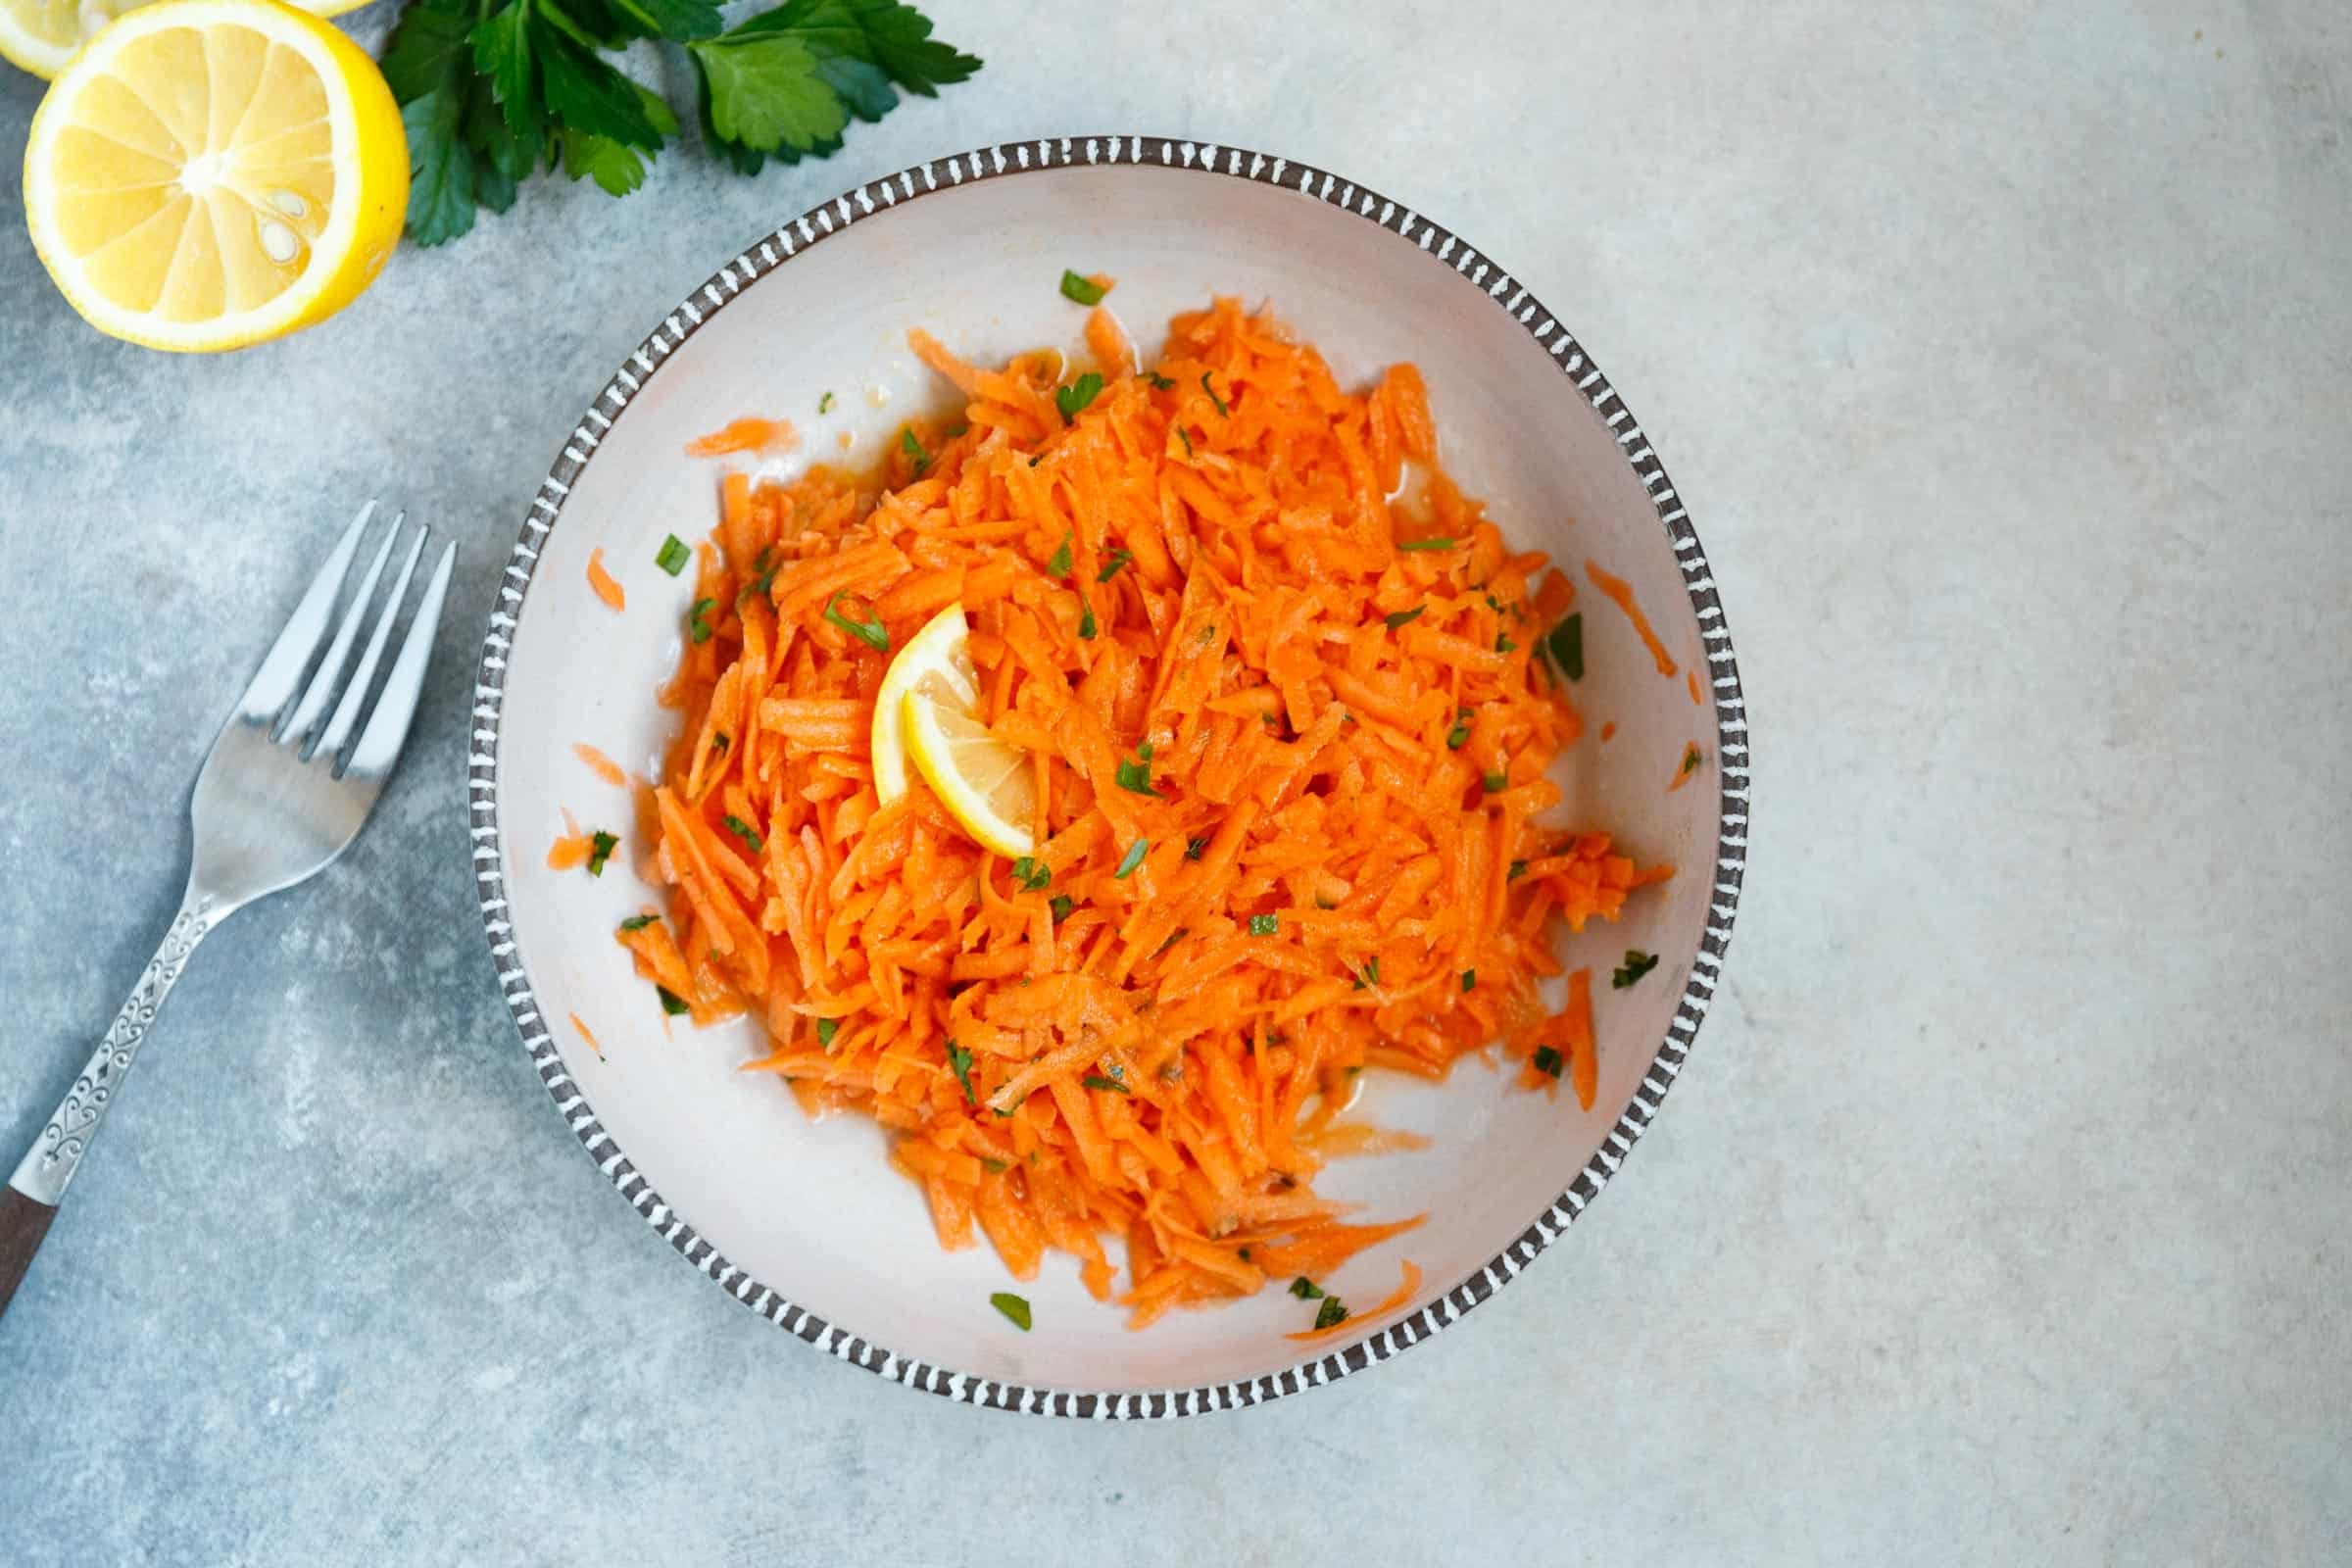 How to Make a Cold Carrot Salad in the Instant Pot